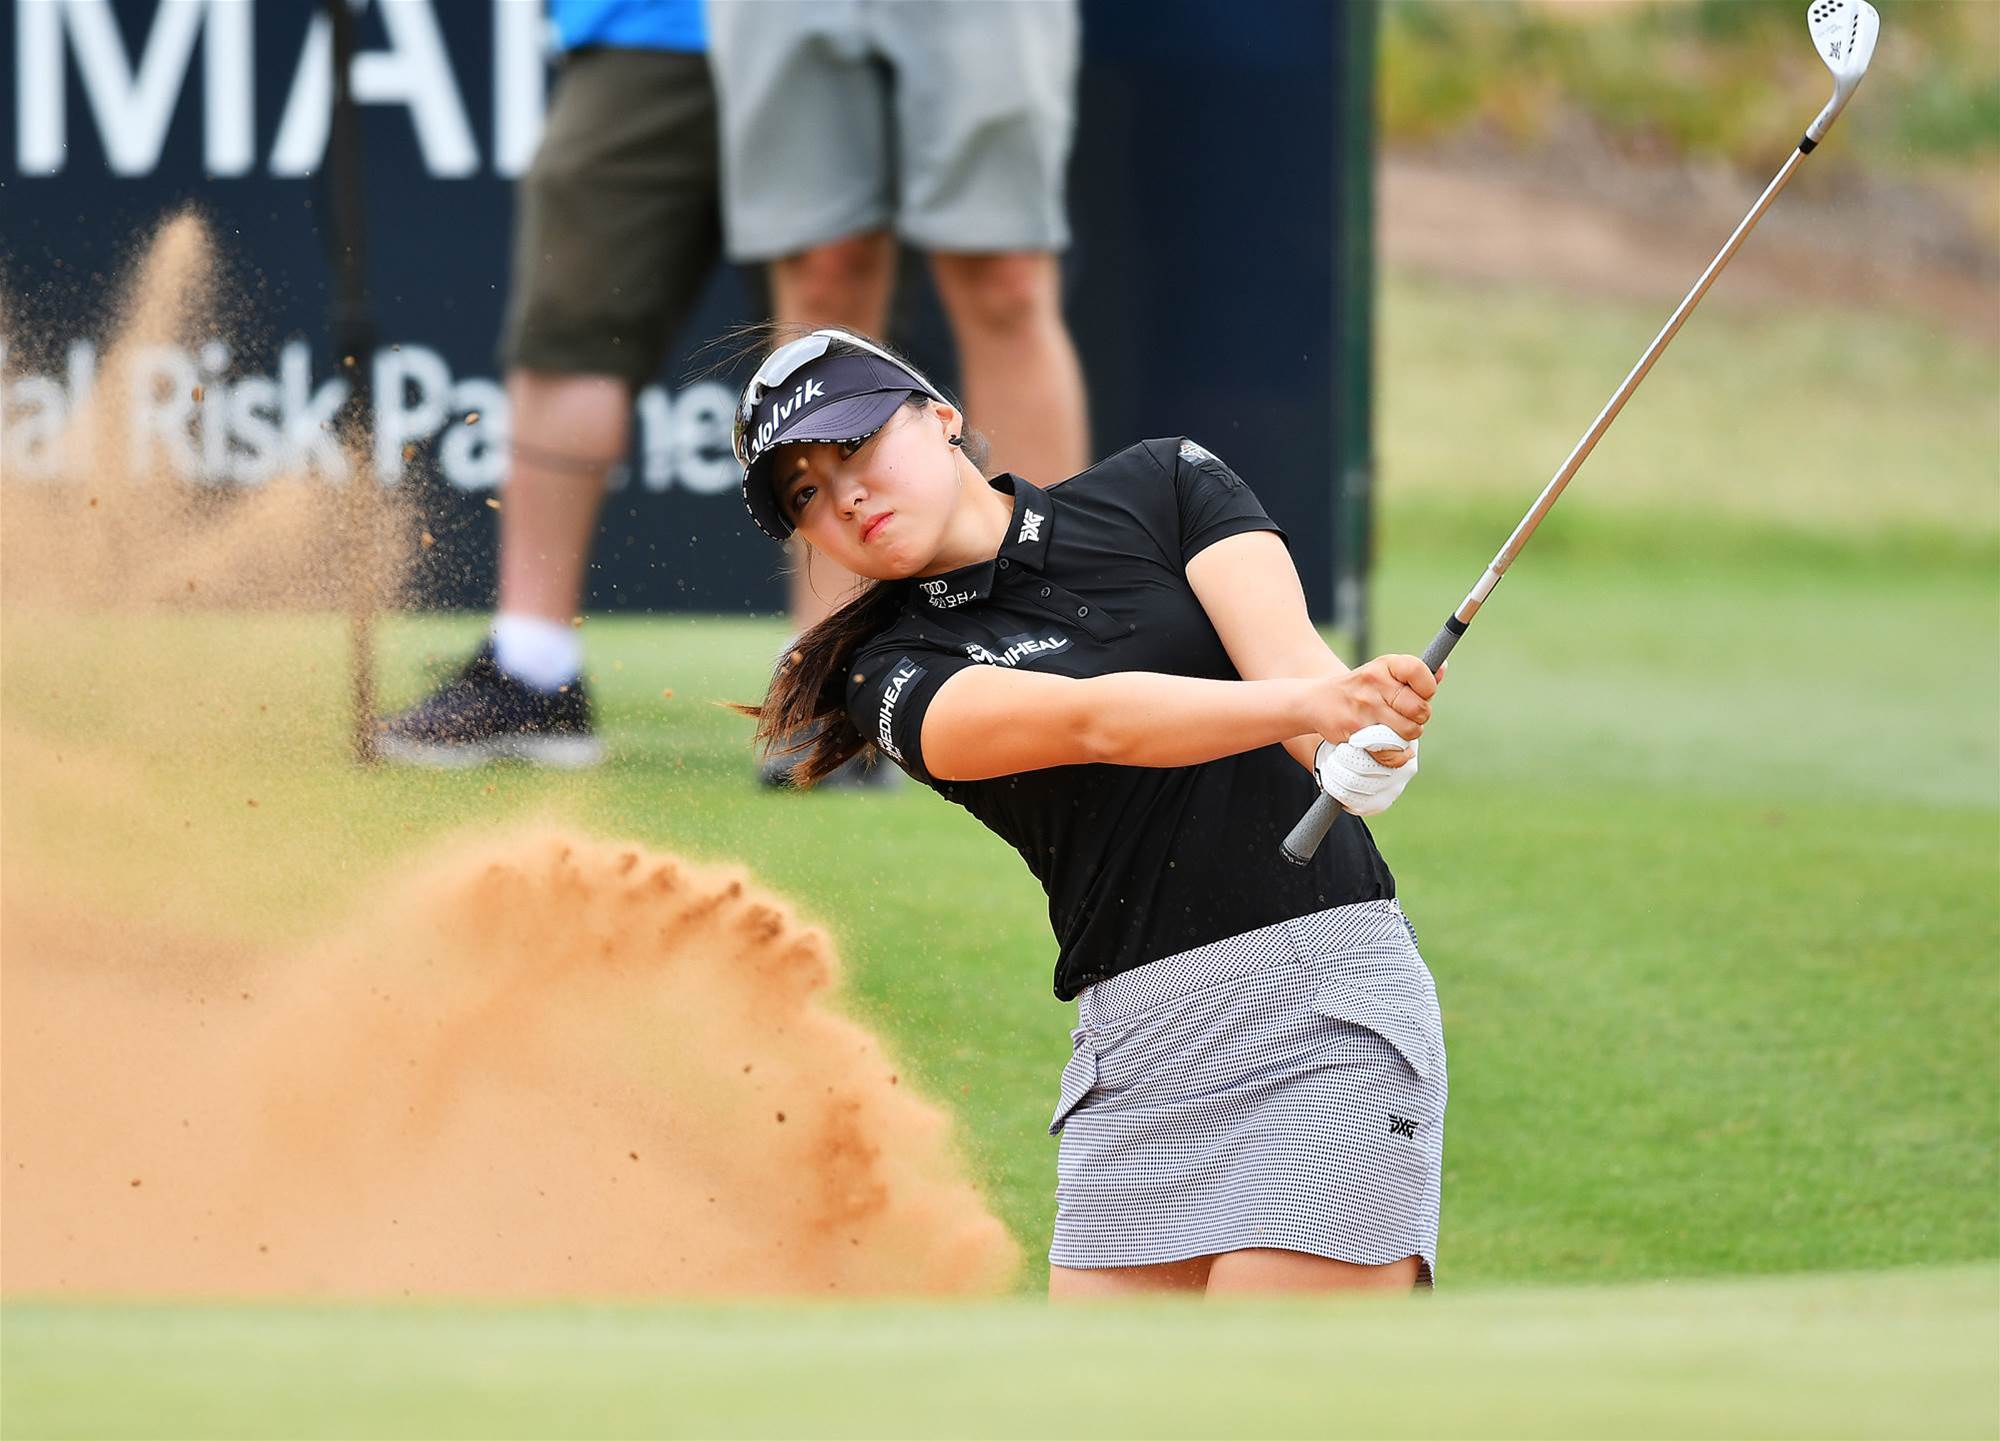 Walk in the Park: Inbee bolts clear at Royal Adelaide - Golf Australia ...